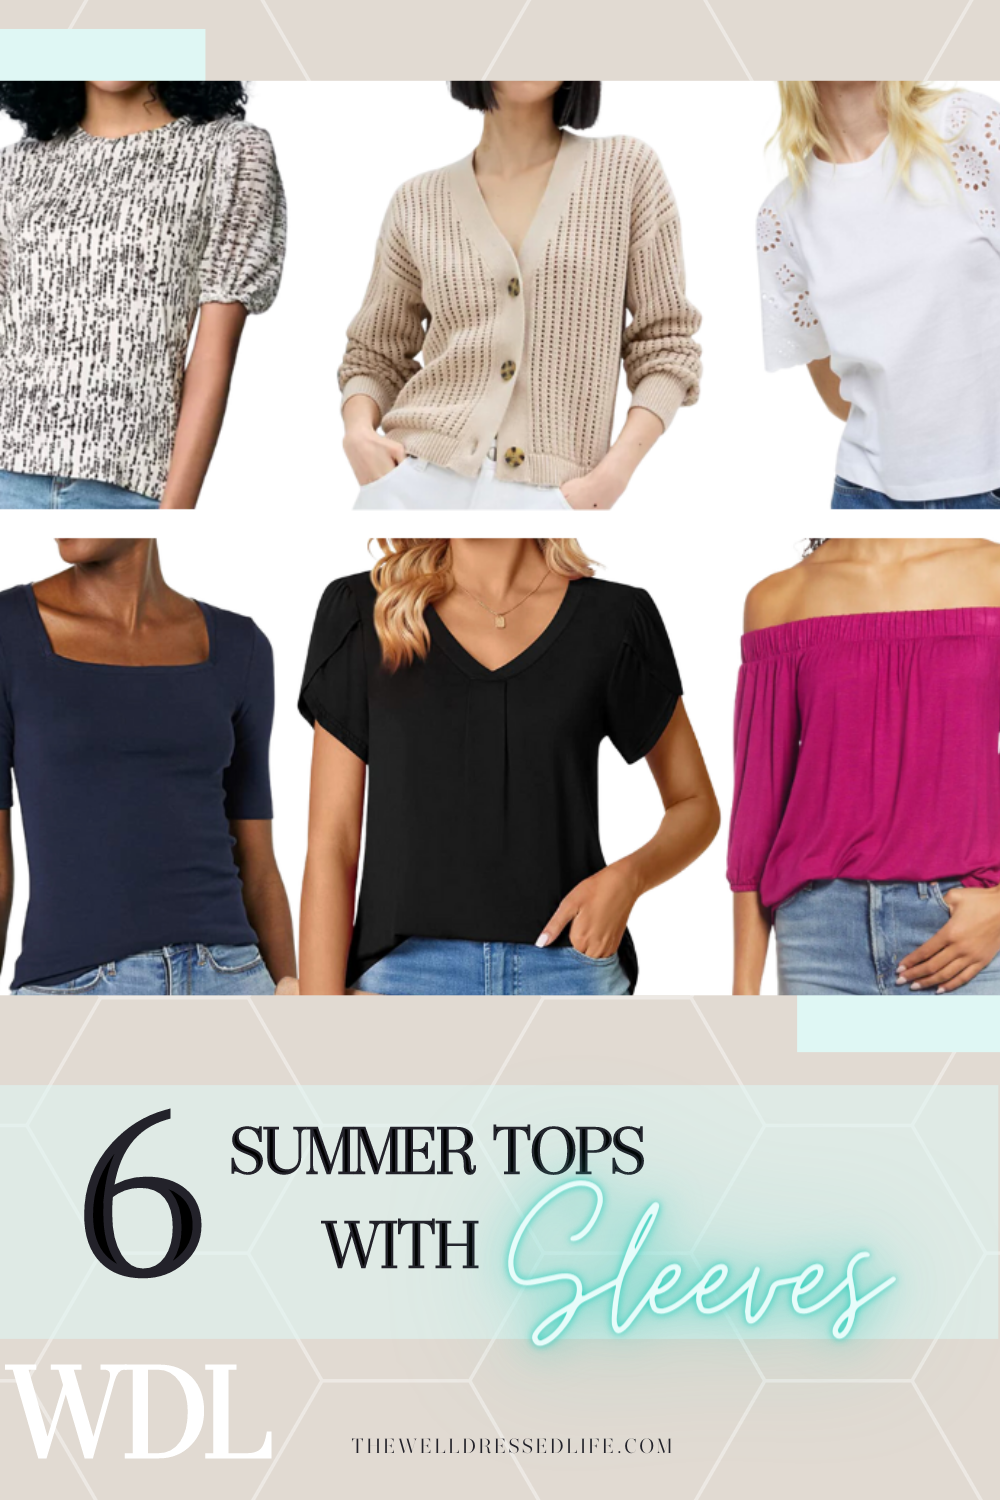 6 Summer Tops with Sleeves